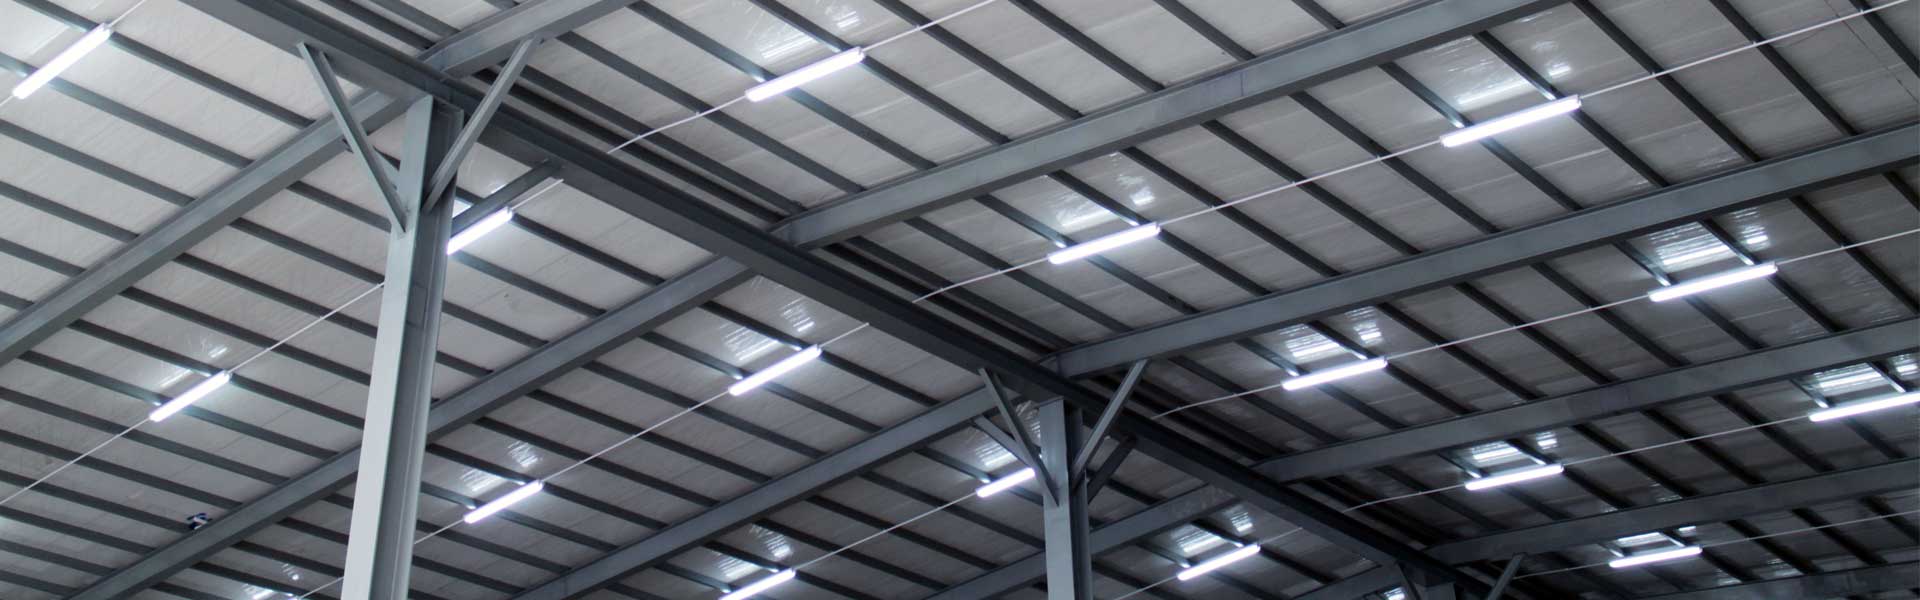 Storage - In order to provide better services to our customers, our warehouse is well ventilated to ensure the air circulation and dryness of the warehouse